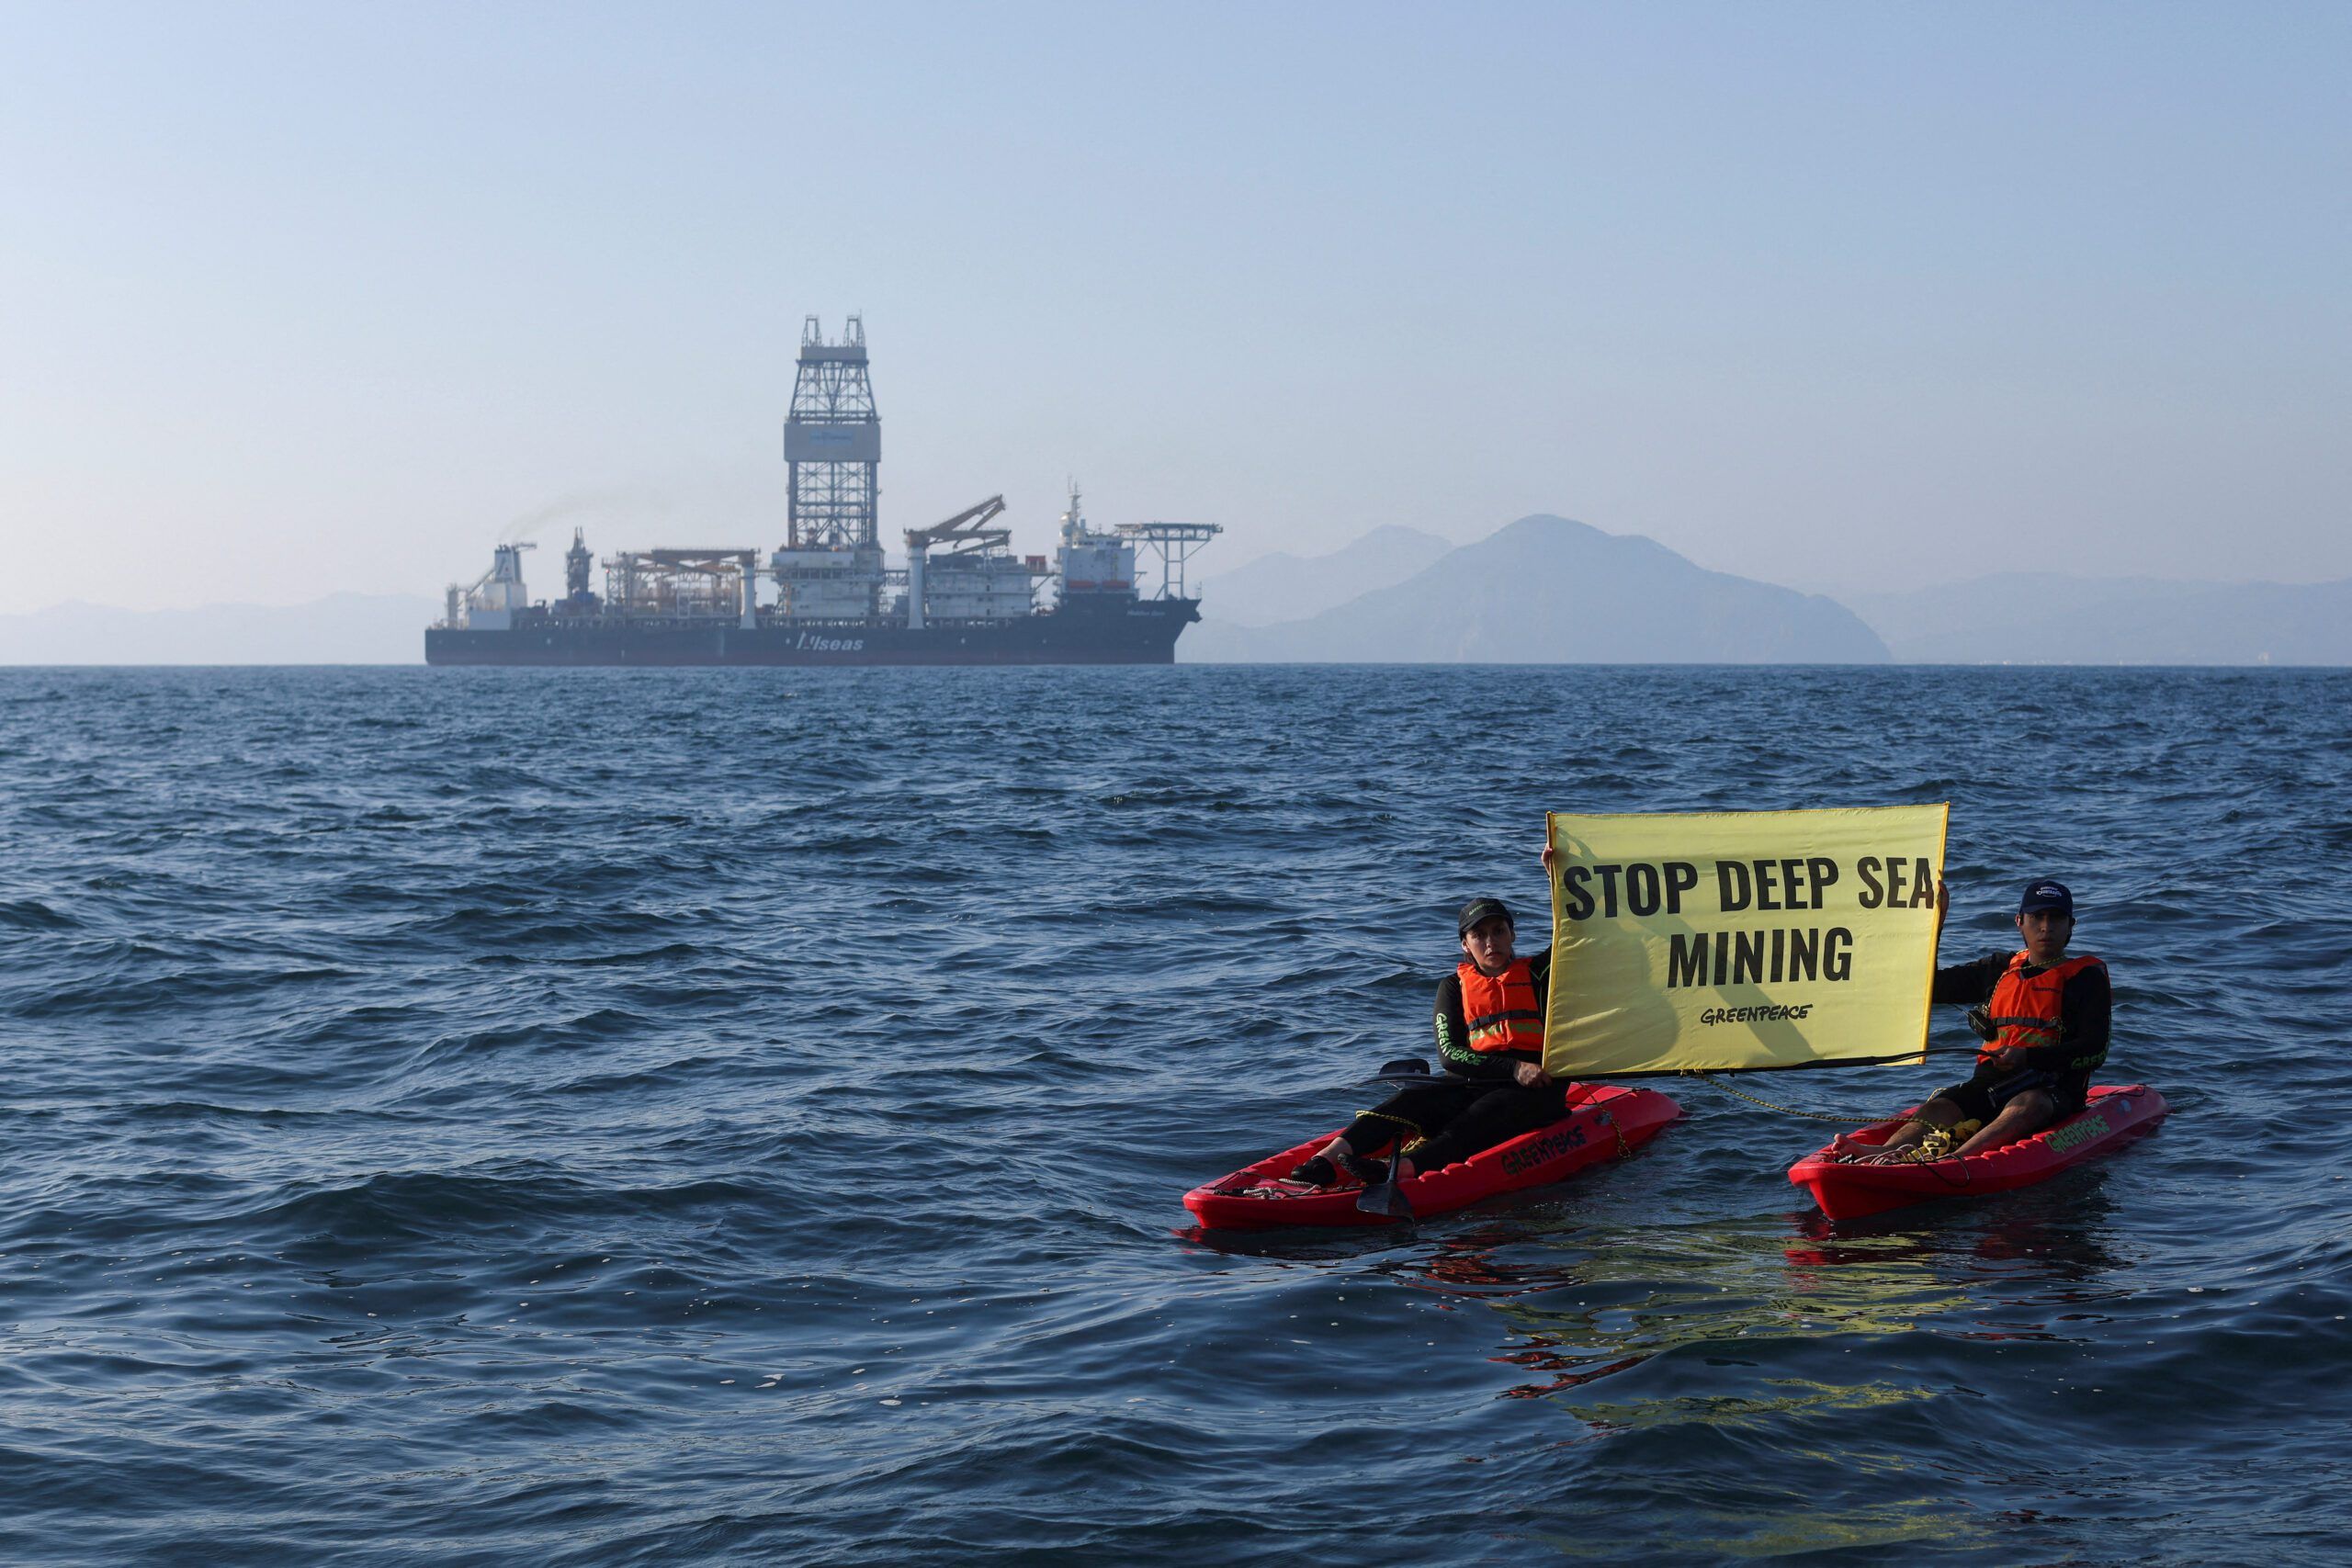 Two kayaks with Greenpeace activists inside hold a sign saying "Stop Deep Sea Mining" in front of a ship called 'The Hidden Gem' off the coast of Manzanillo, Mexico.